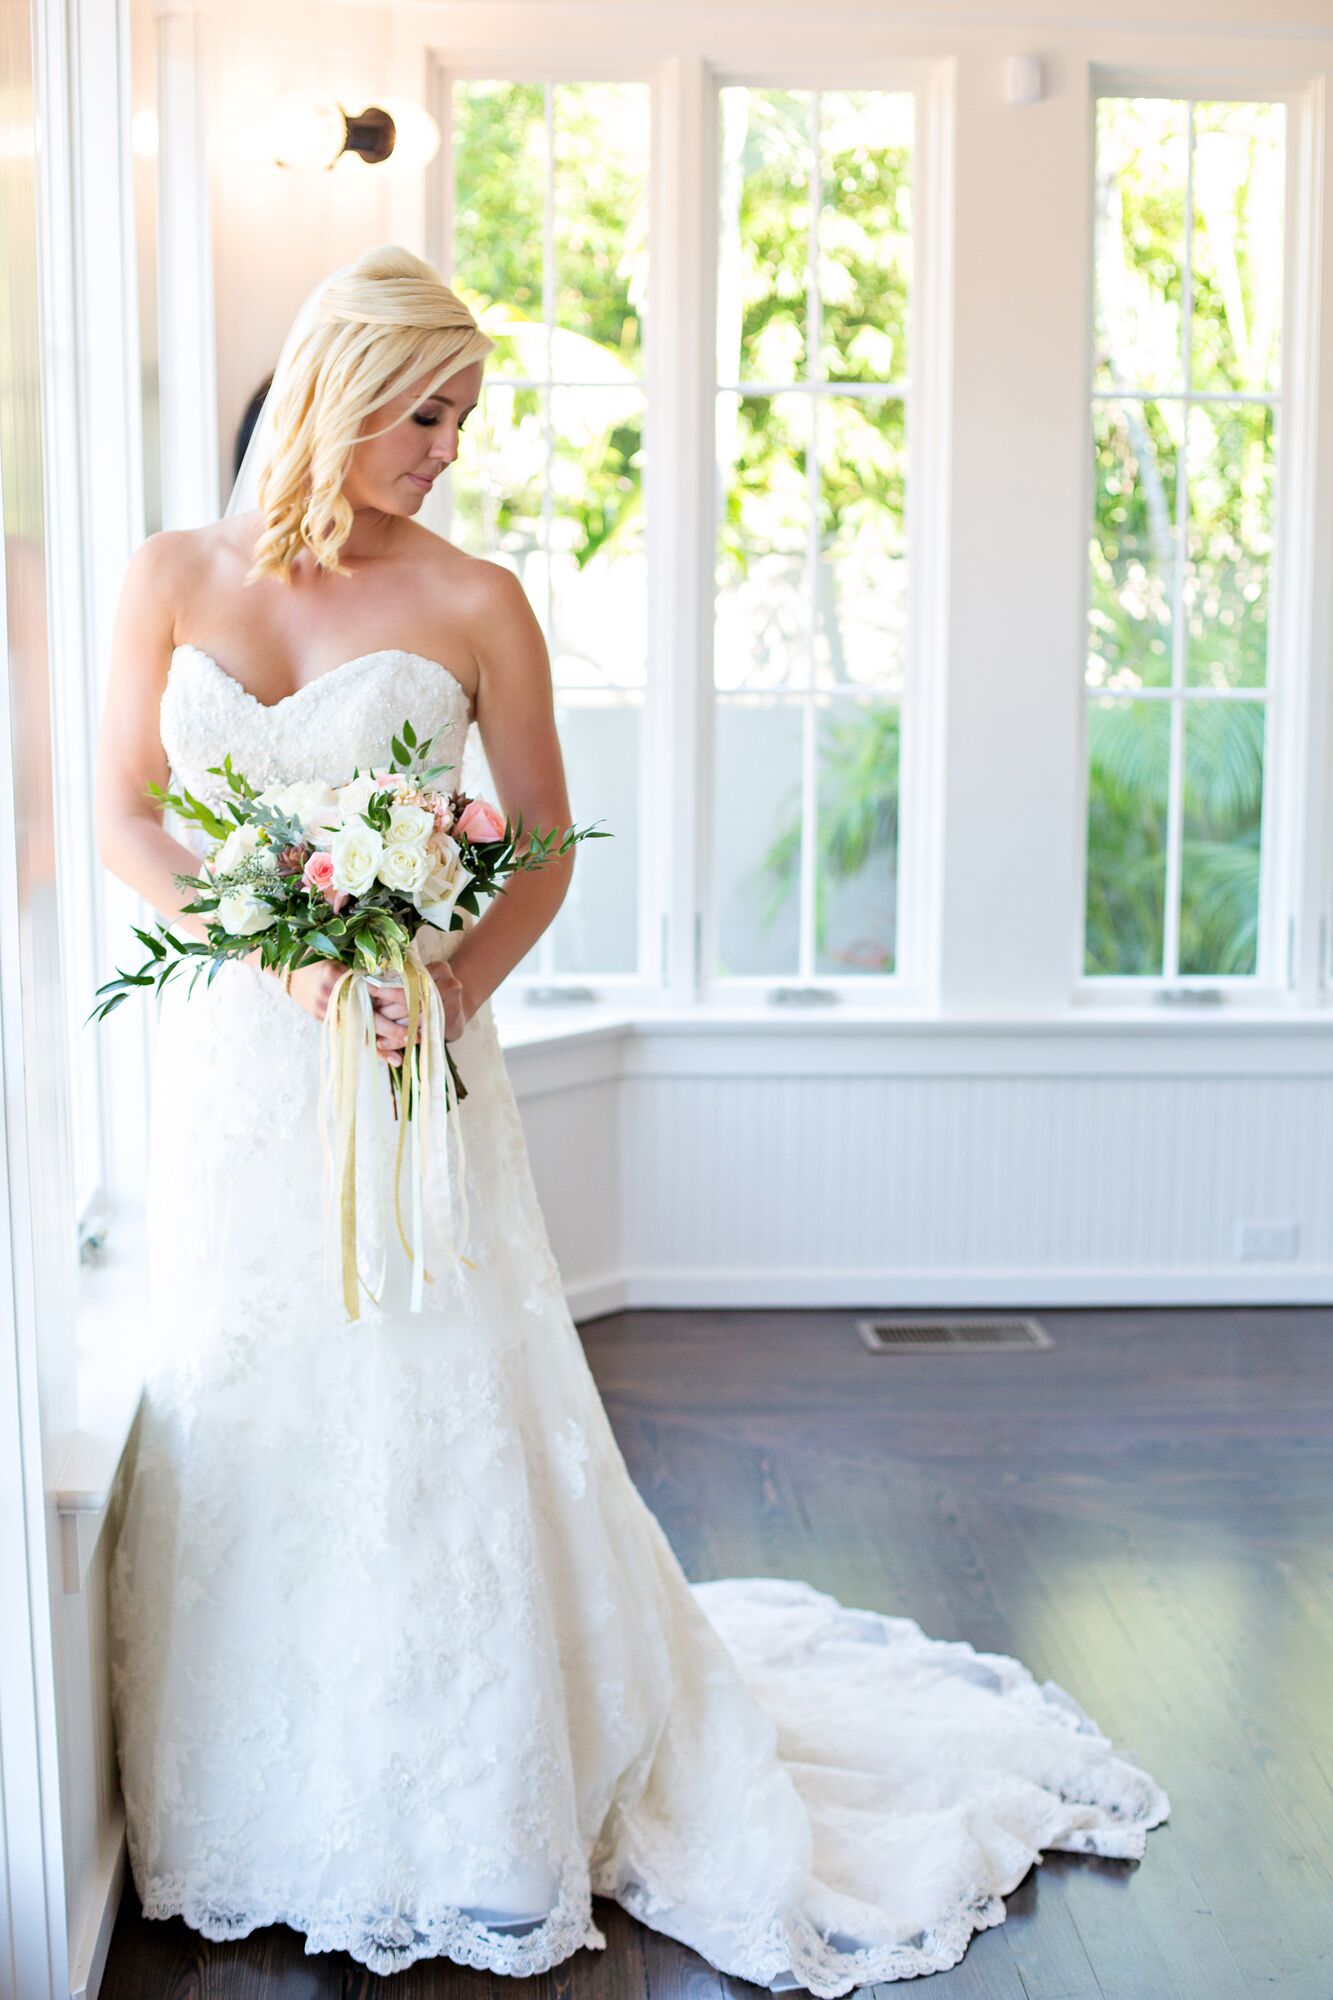 How to choose a getting ready location for your wedding day - NJ Wedding  Photographer